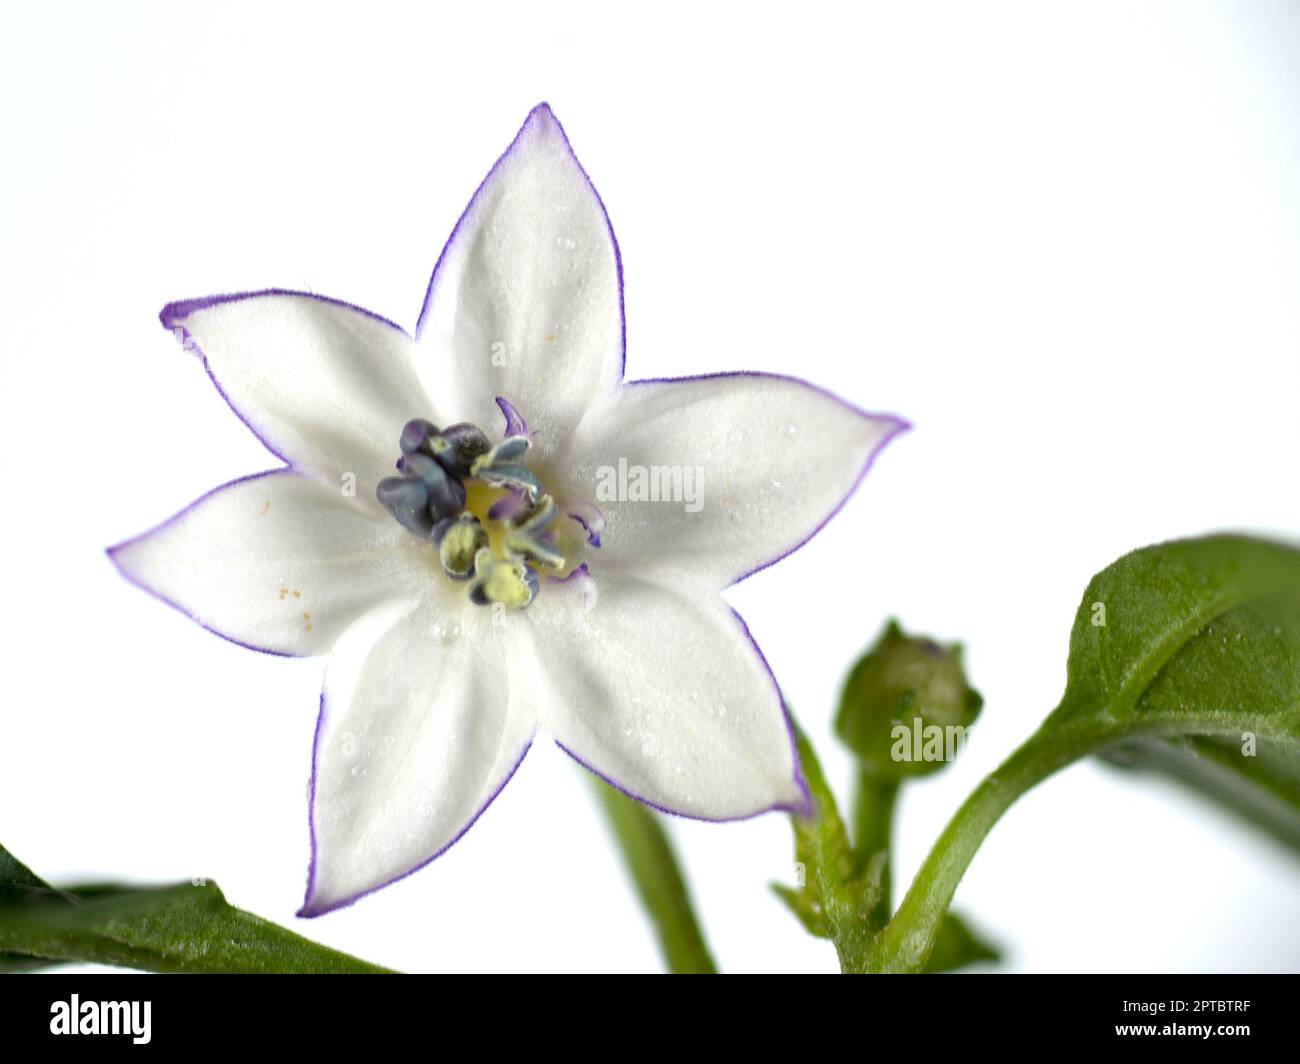 Close up of an ornamental pepper (Capsicum annuum cultivar) flower on a white background Stock Photo